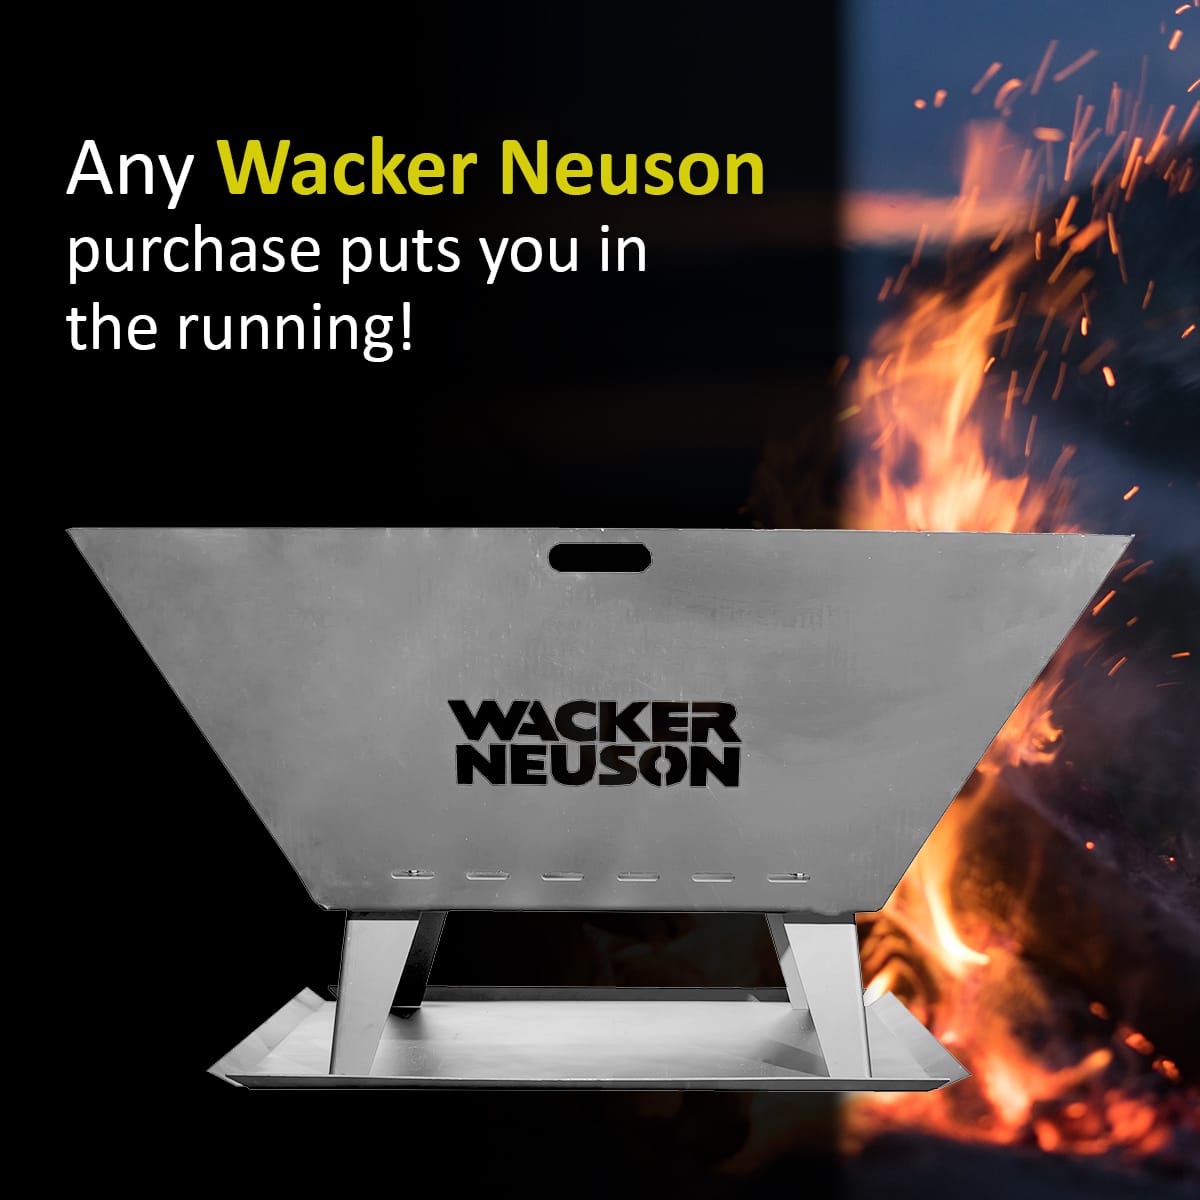 Image of a triangular metal fire pit with the brand logo "Wacker Neuson" printed on the side. The background features flames and sparks from a fire, casting a warm glow. The text says, "Any Wacker Neuson purchase puts you in the running for an exciting fire pit giveaway!